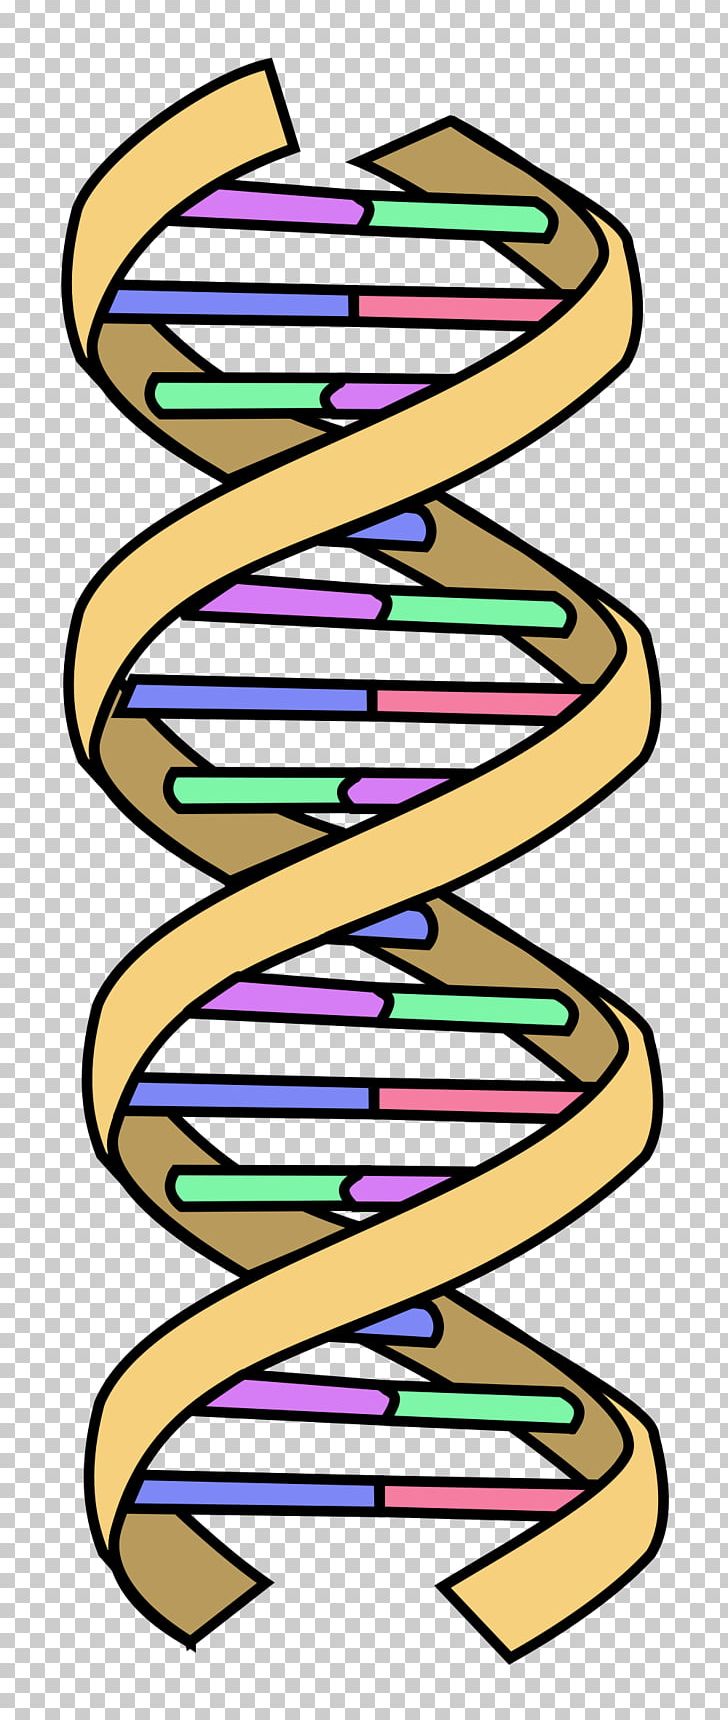 DNA Nucleic Acid Double Helix Genetics PNG, Clipart, Area, Artwork, Biology, Cell, Crispr Free PNG Download